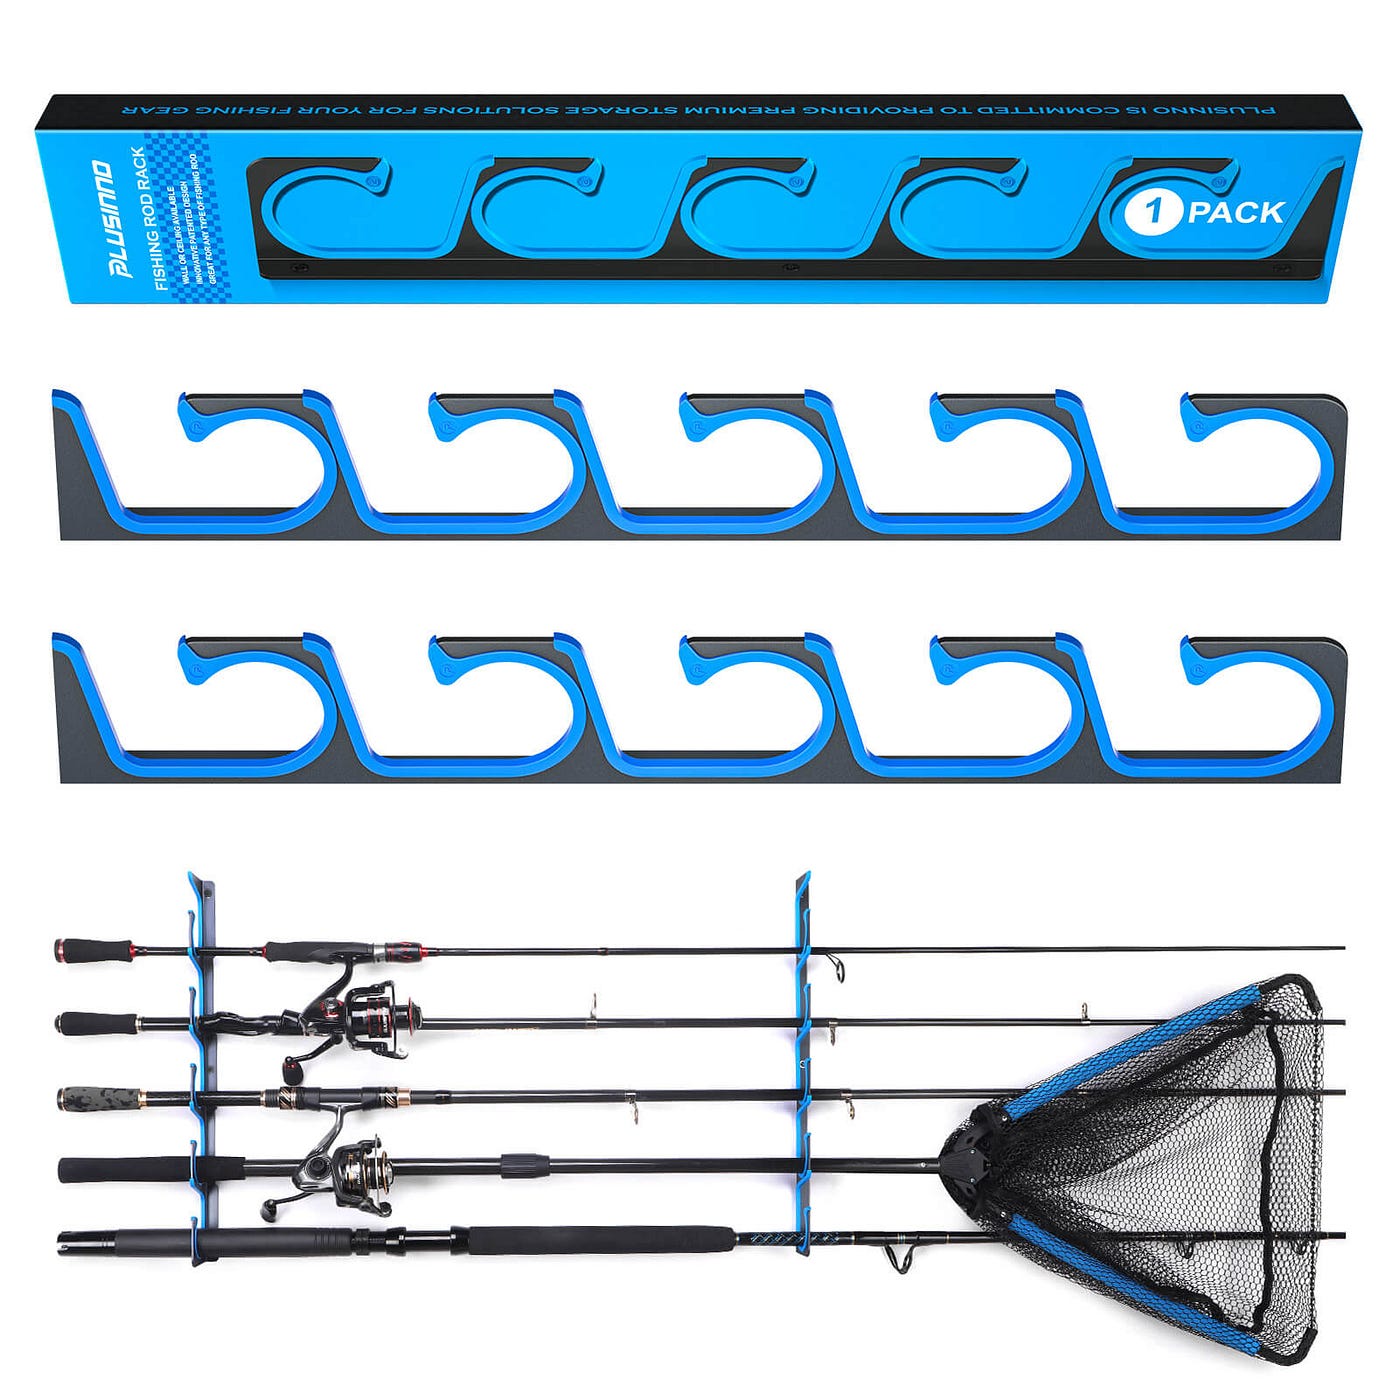 The Ultimate Guide To Buying The Right Fishing Rod Rack For Your